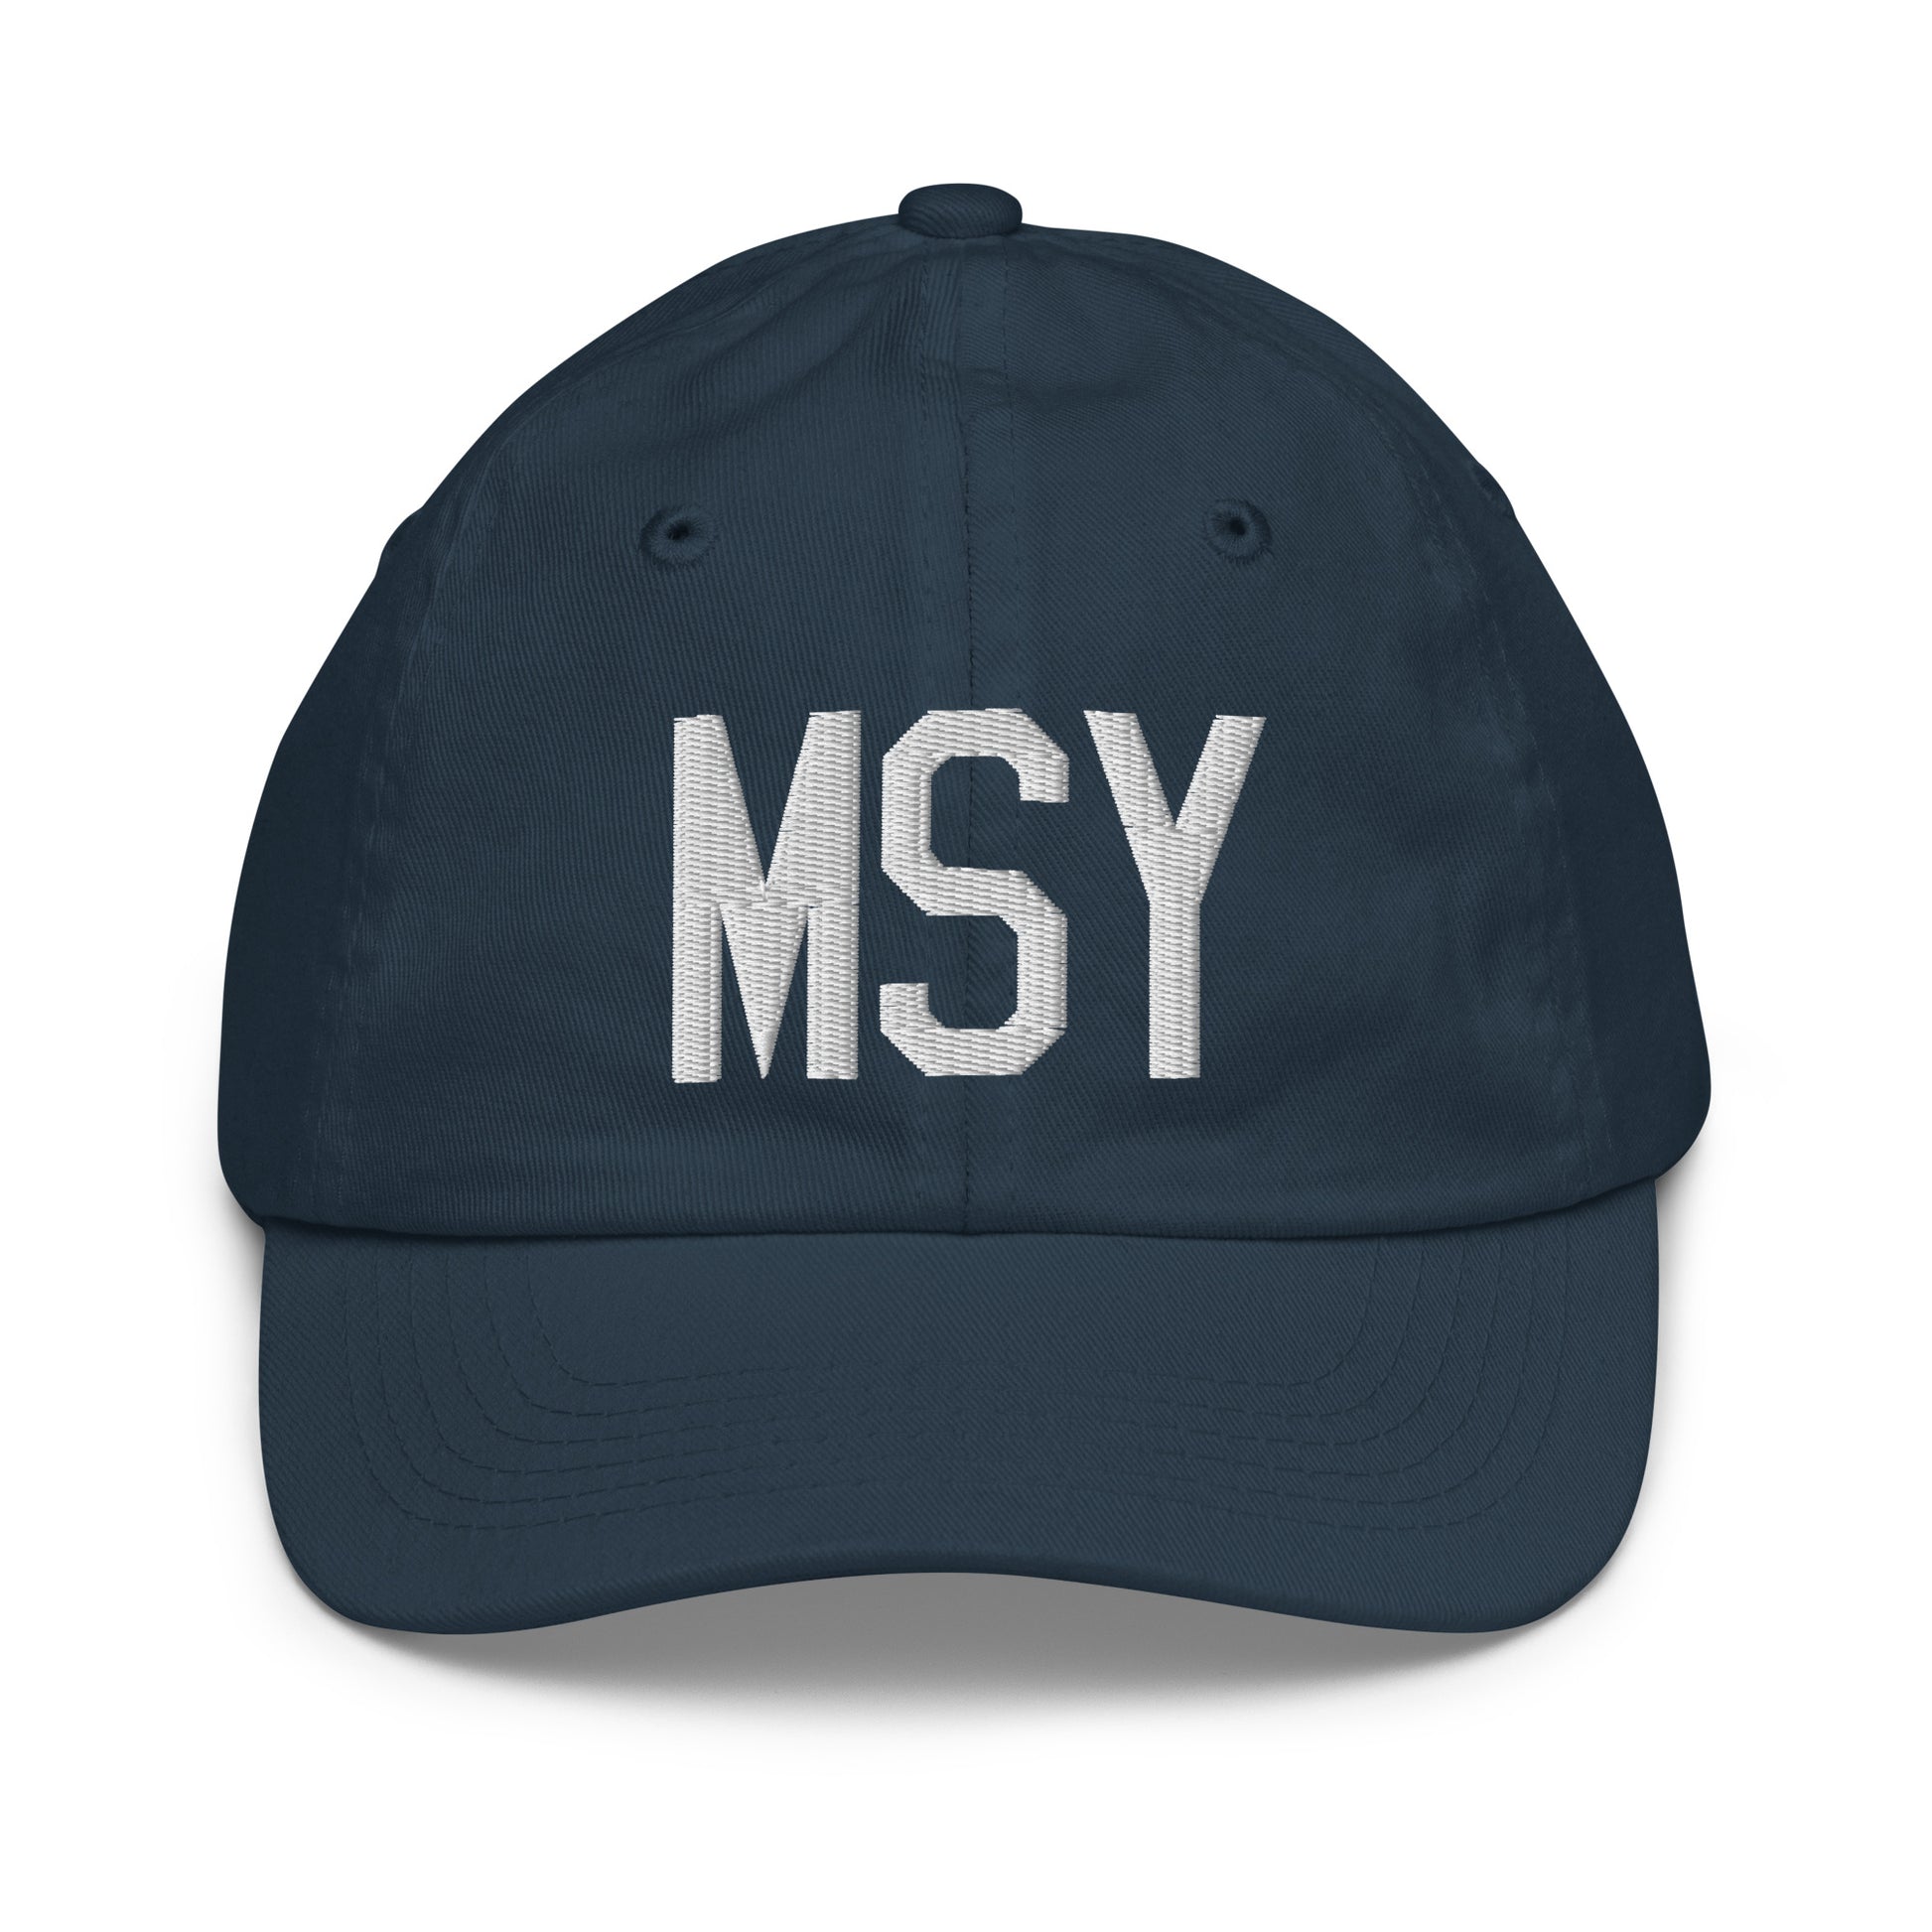 Airport Code Kid's Baseball Cap - White • MSY New Orleans • YHM Designs - Image 14